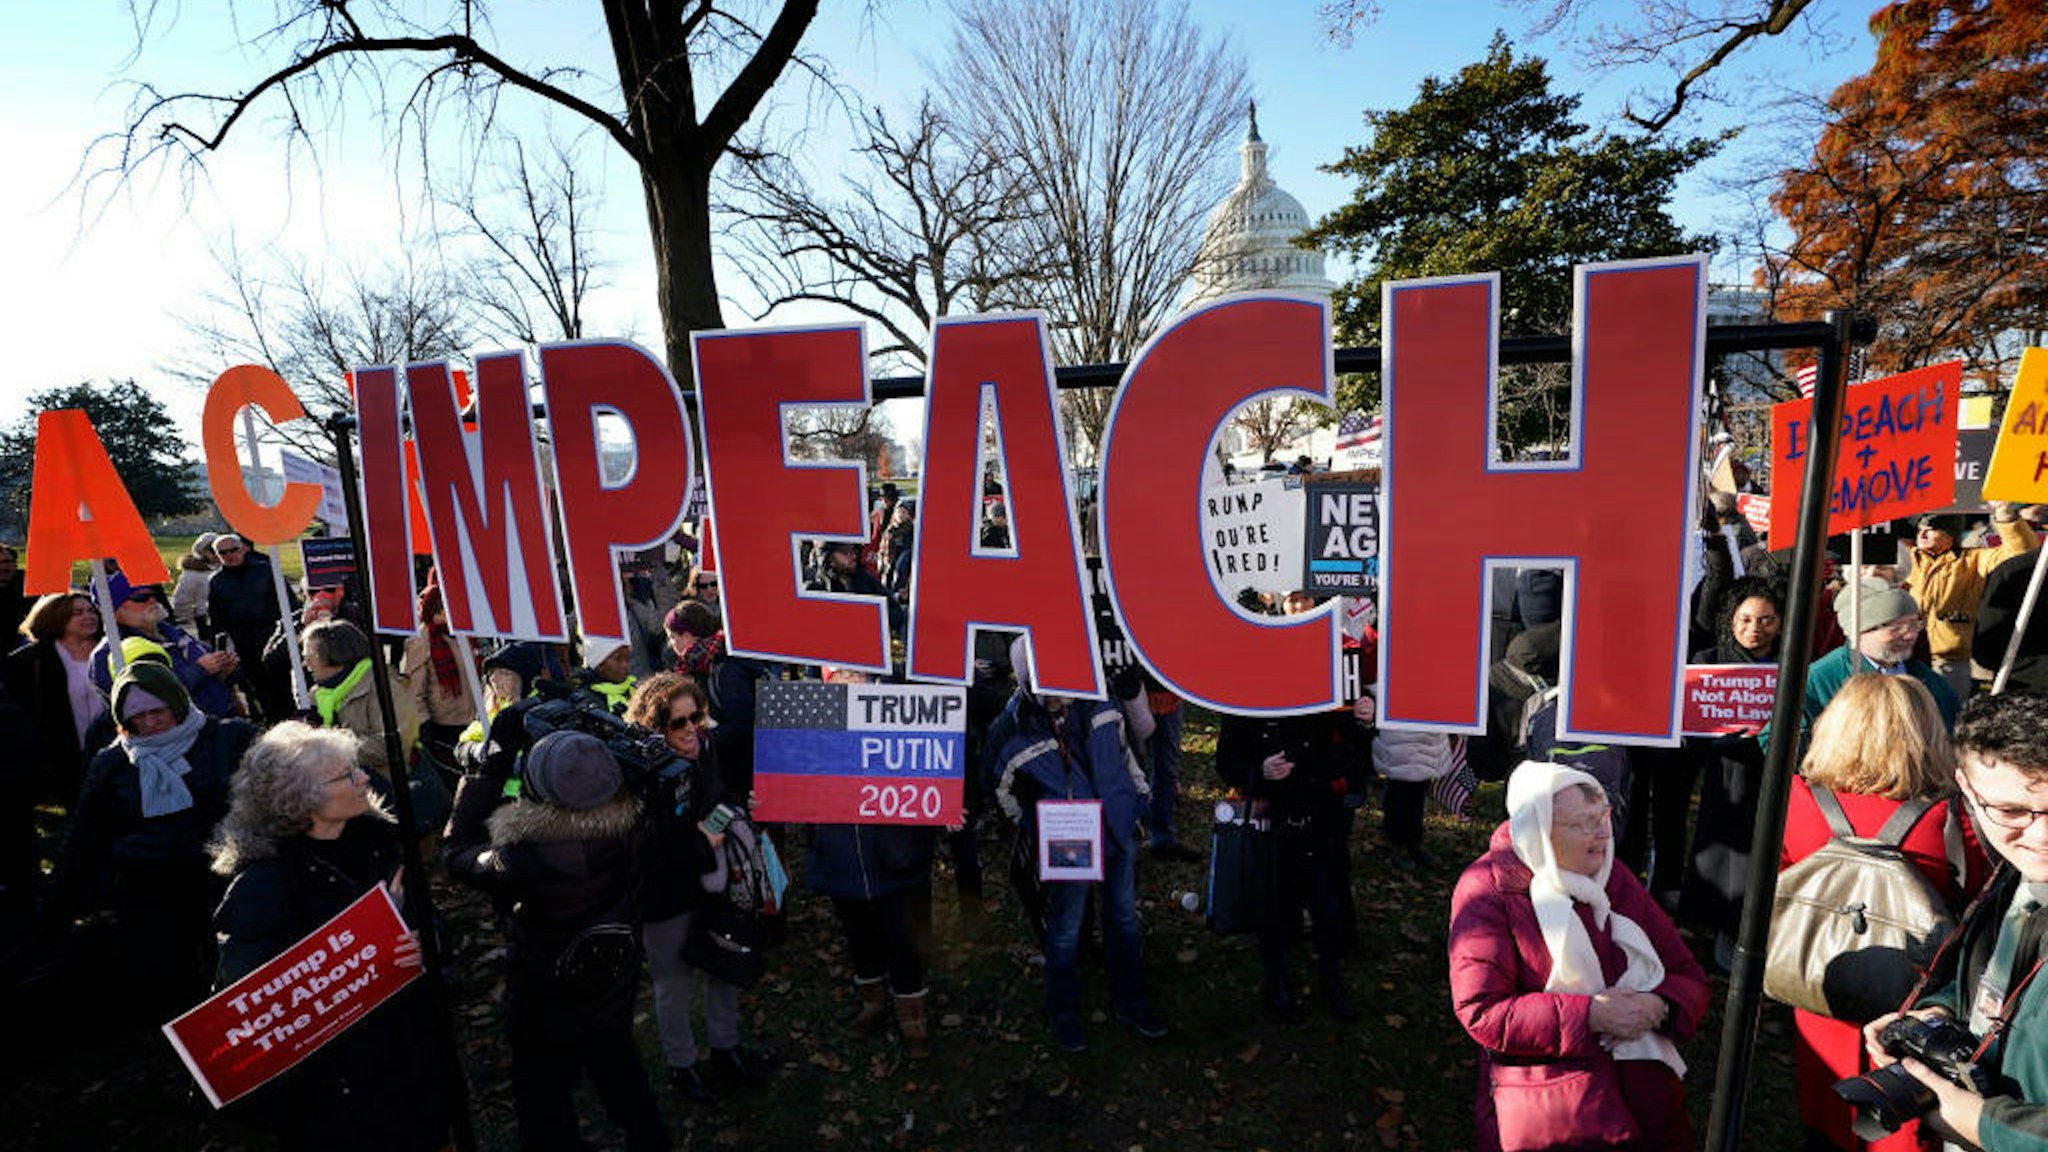 Protesters supporting the impeachment of U.S. President Donald Trump gather outside the U.S. Capitol December 18, 2019 in Washington, DC. Later today the U.S. House of Representatives is expected to vote on two articles of impeachment against Trump charging him with abuse of power and obstruction of Congress. (Photo by Win McNamee/Getty Images)